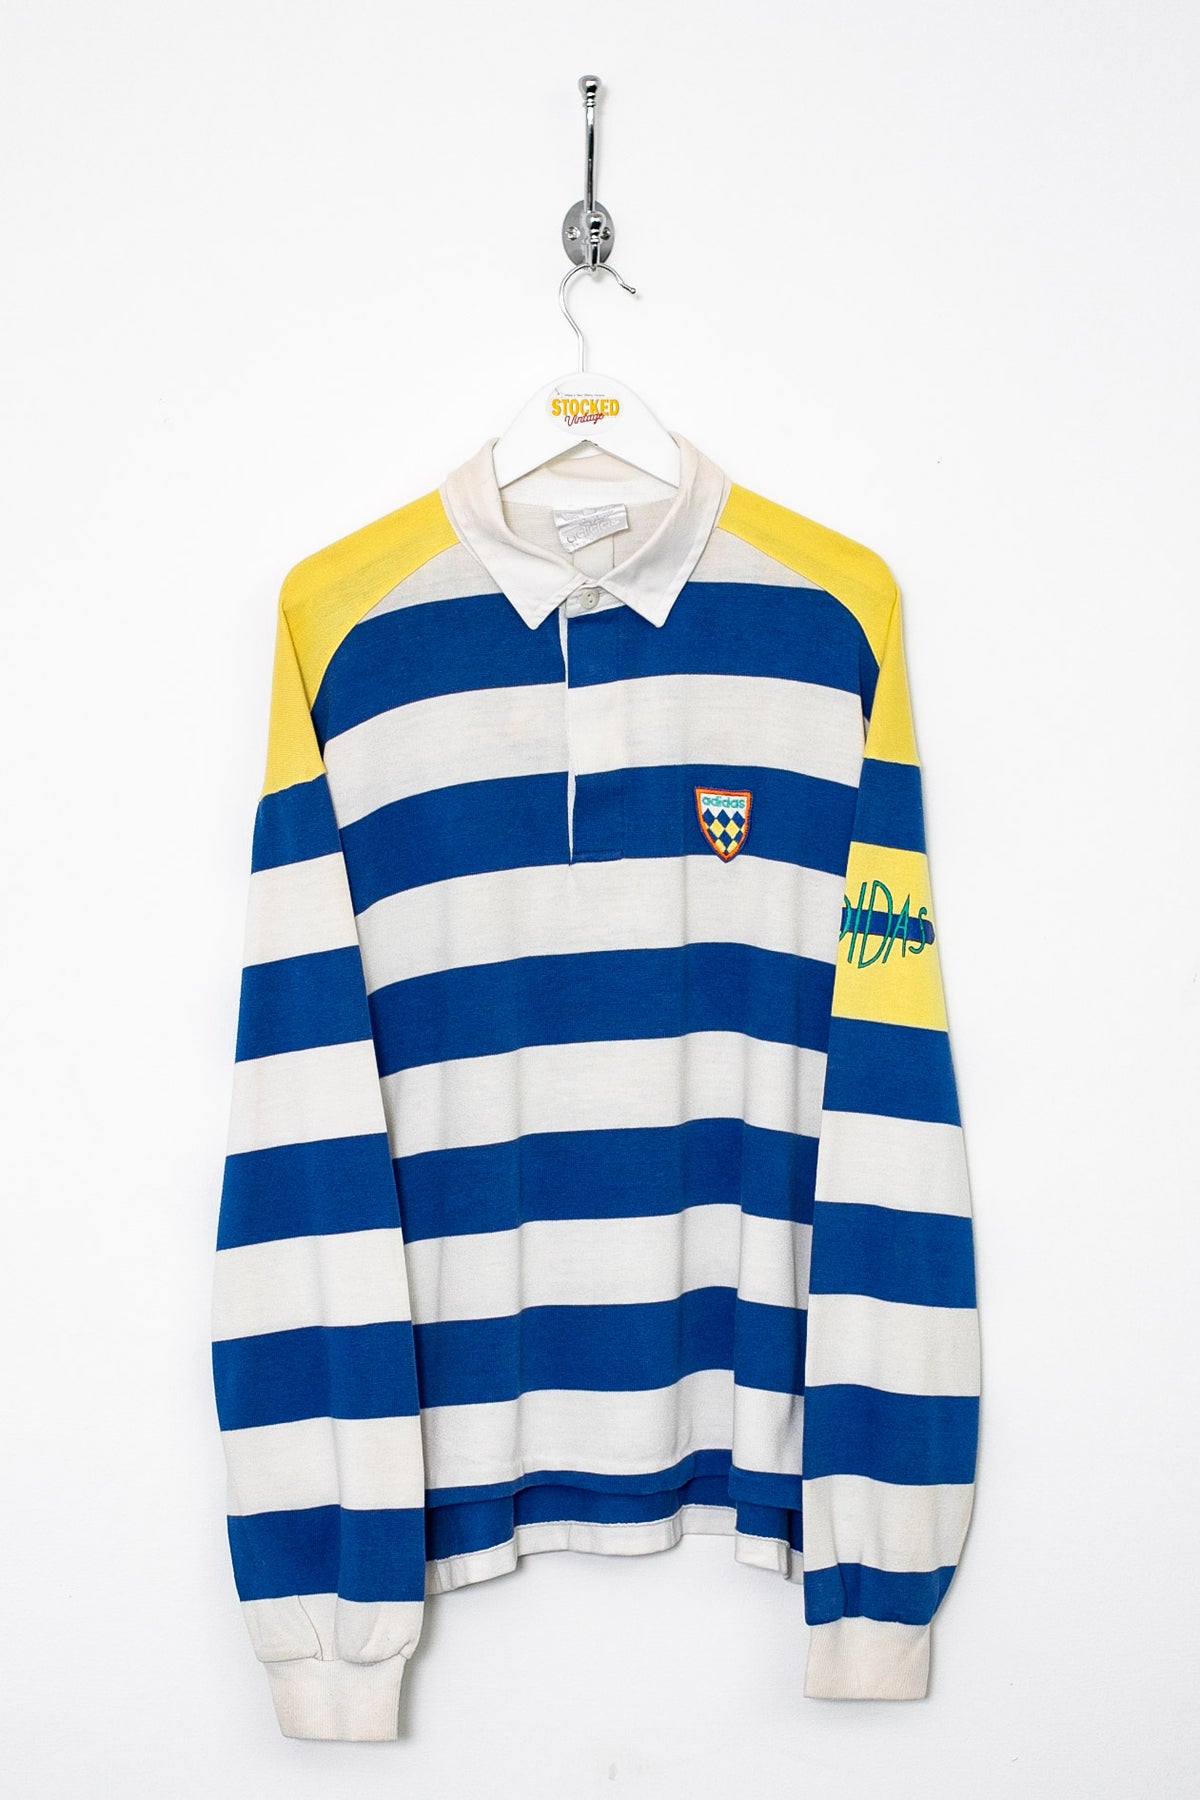 90s Adidas Rugby Shirt (L)